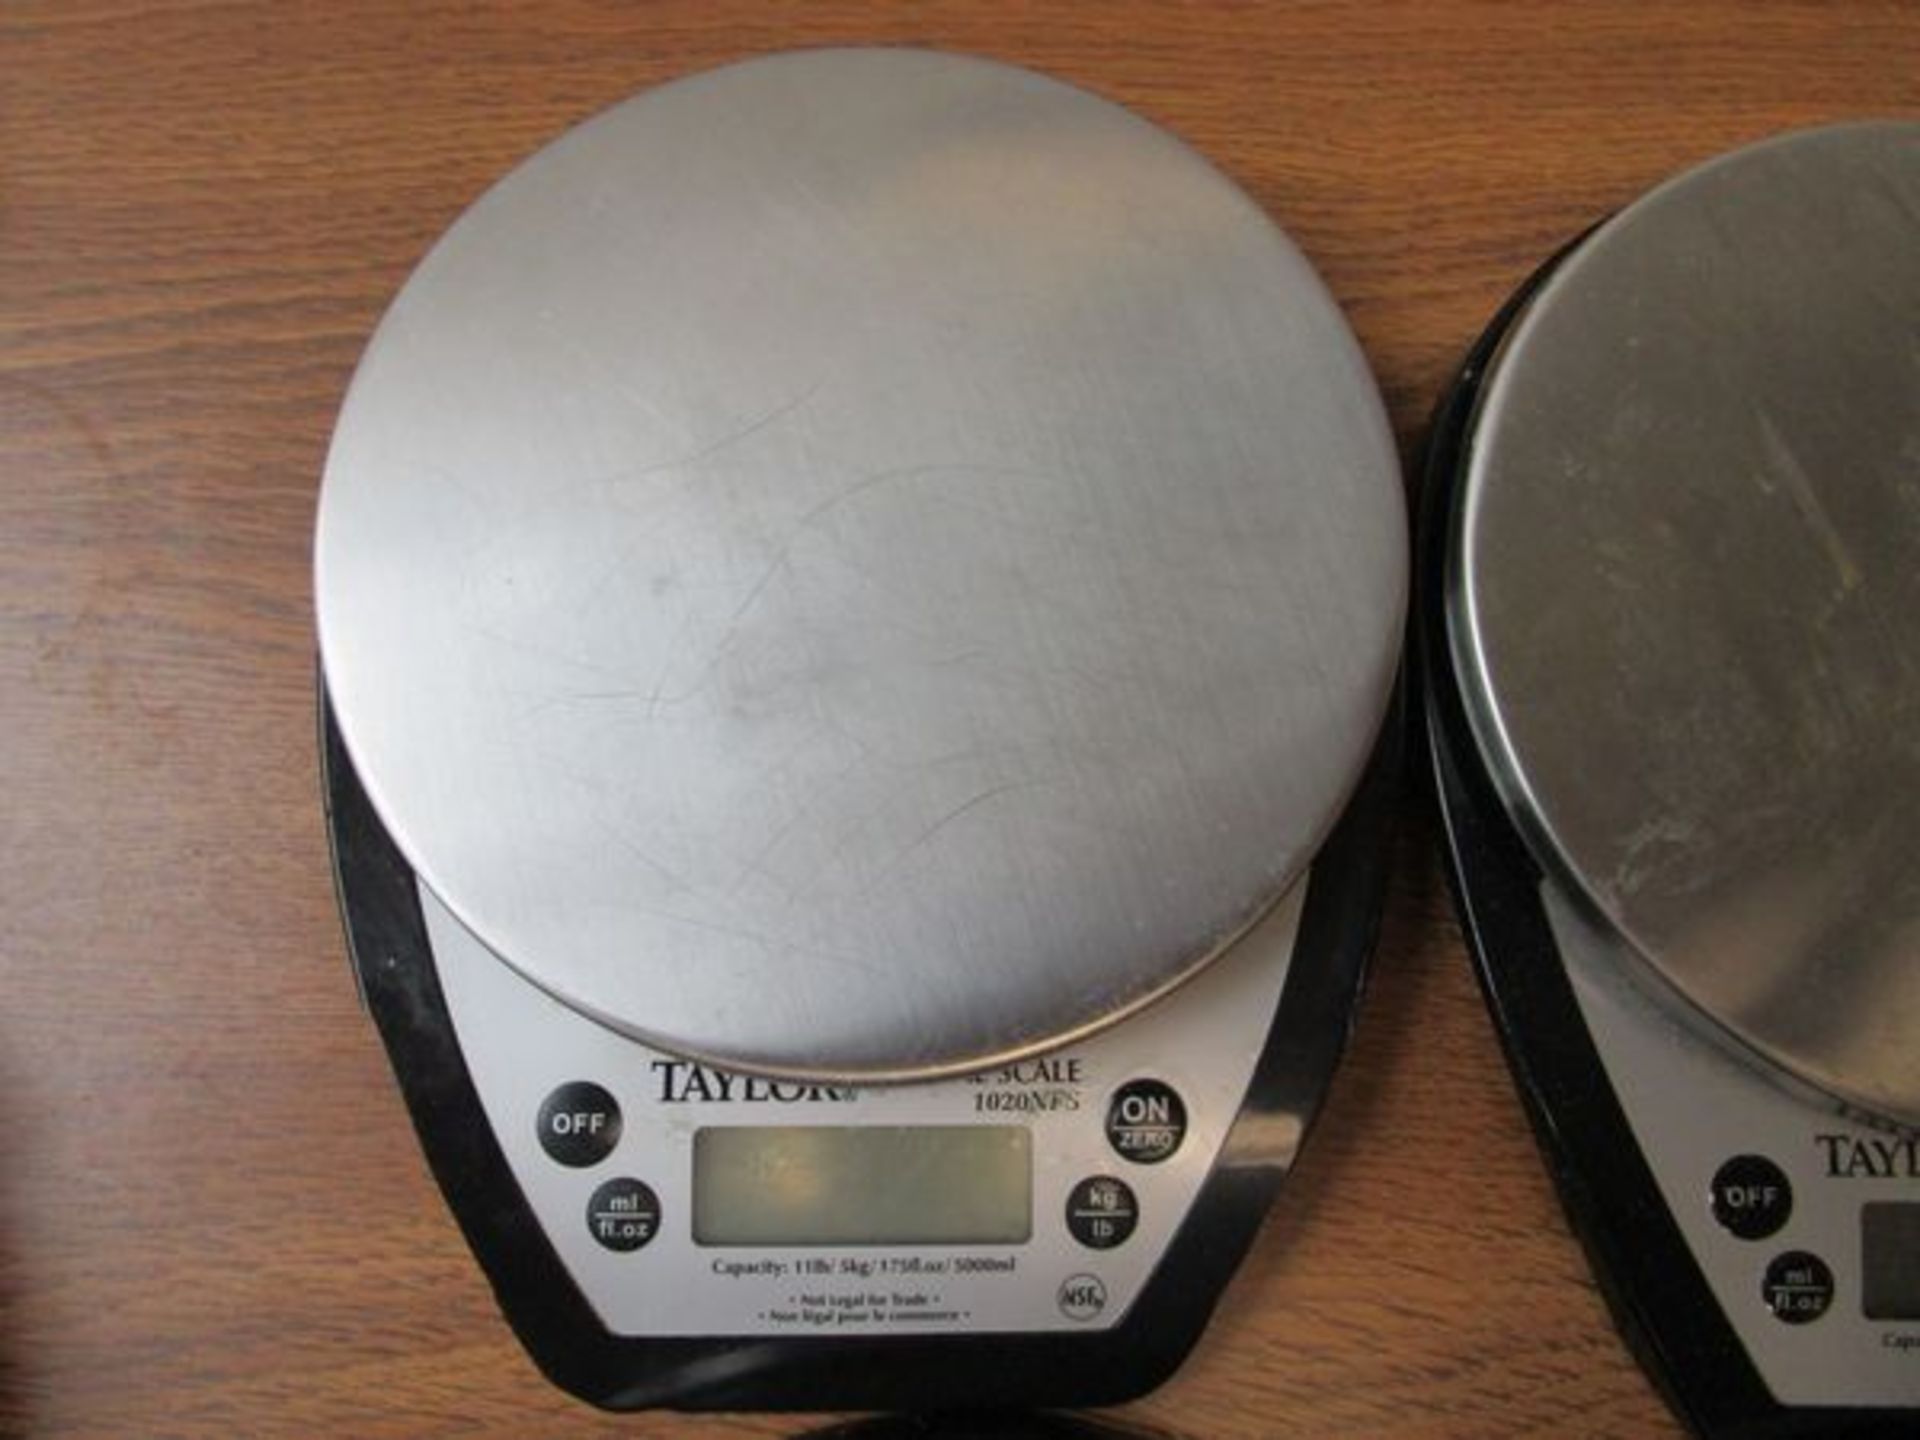 LOT (8) Taylor 1020NFS Digital Scales, 11 Lb. Cap., Battery Operated - Image 2 of 2